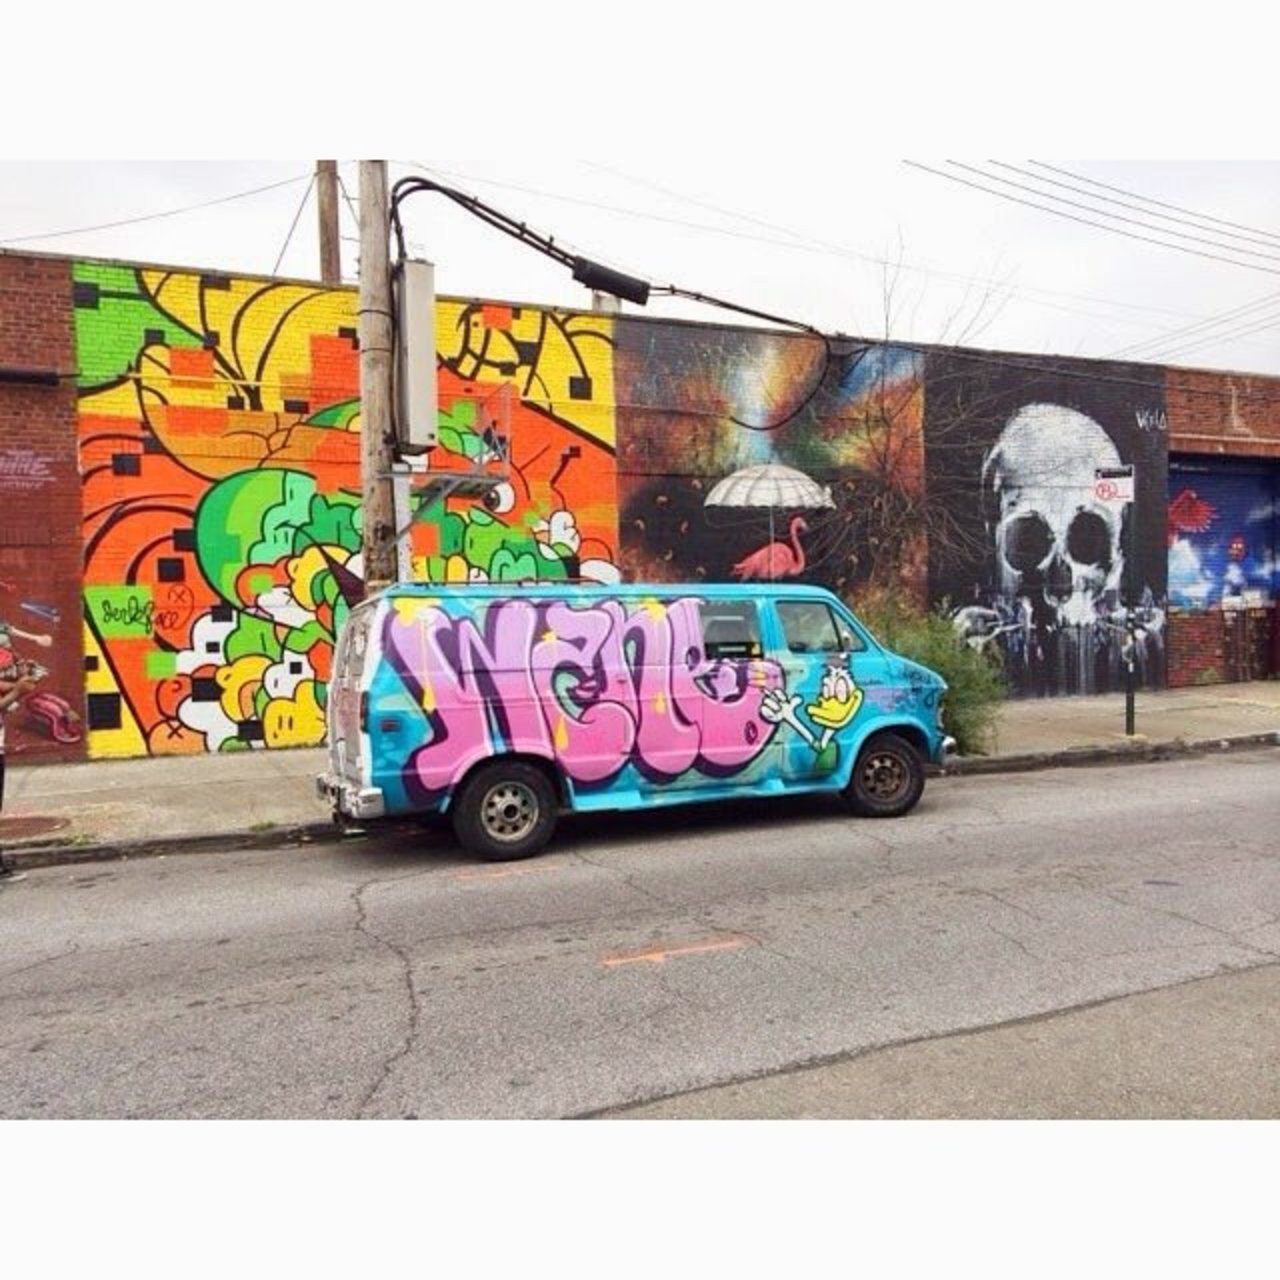 I saw this van in #brooklyn . Does anyone know of the #artist ? #streetart #graffiti https://t.co/2TUyLAsTAG